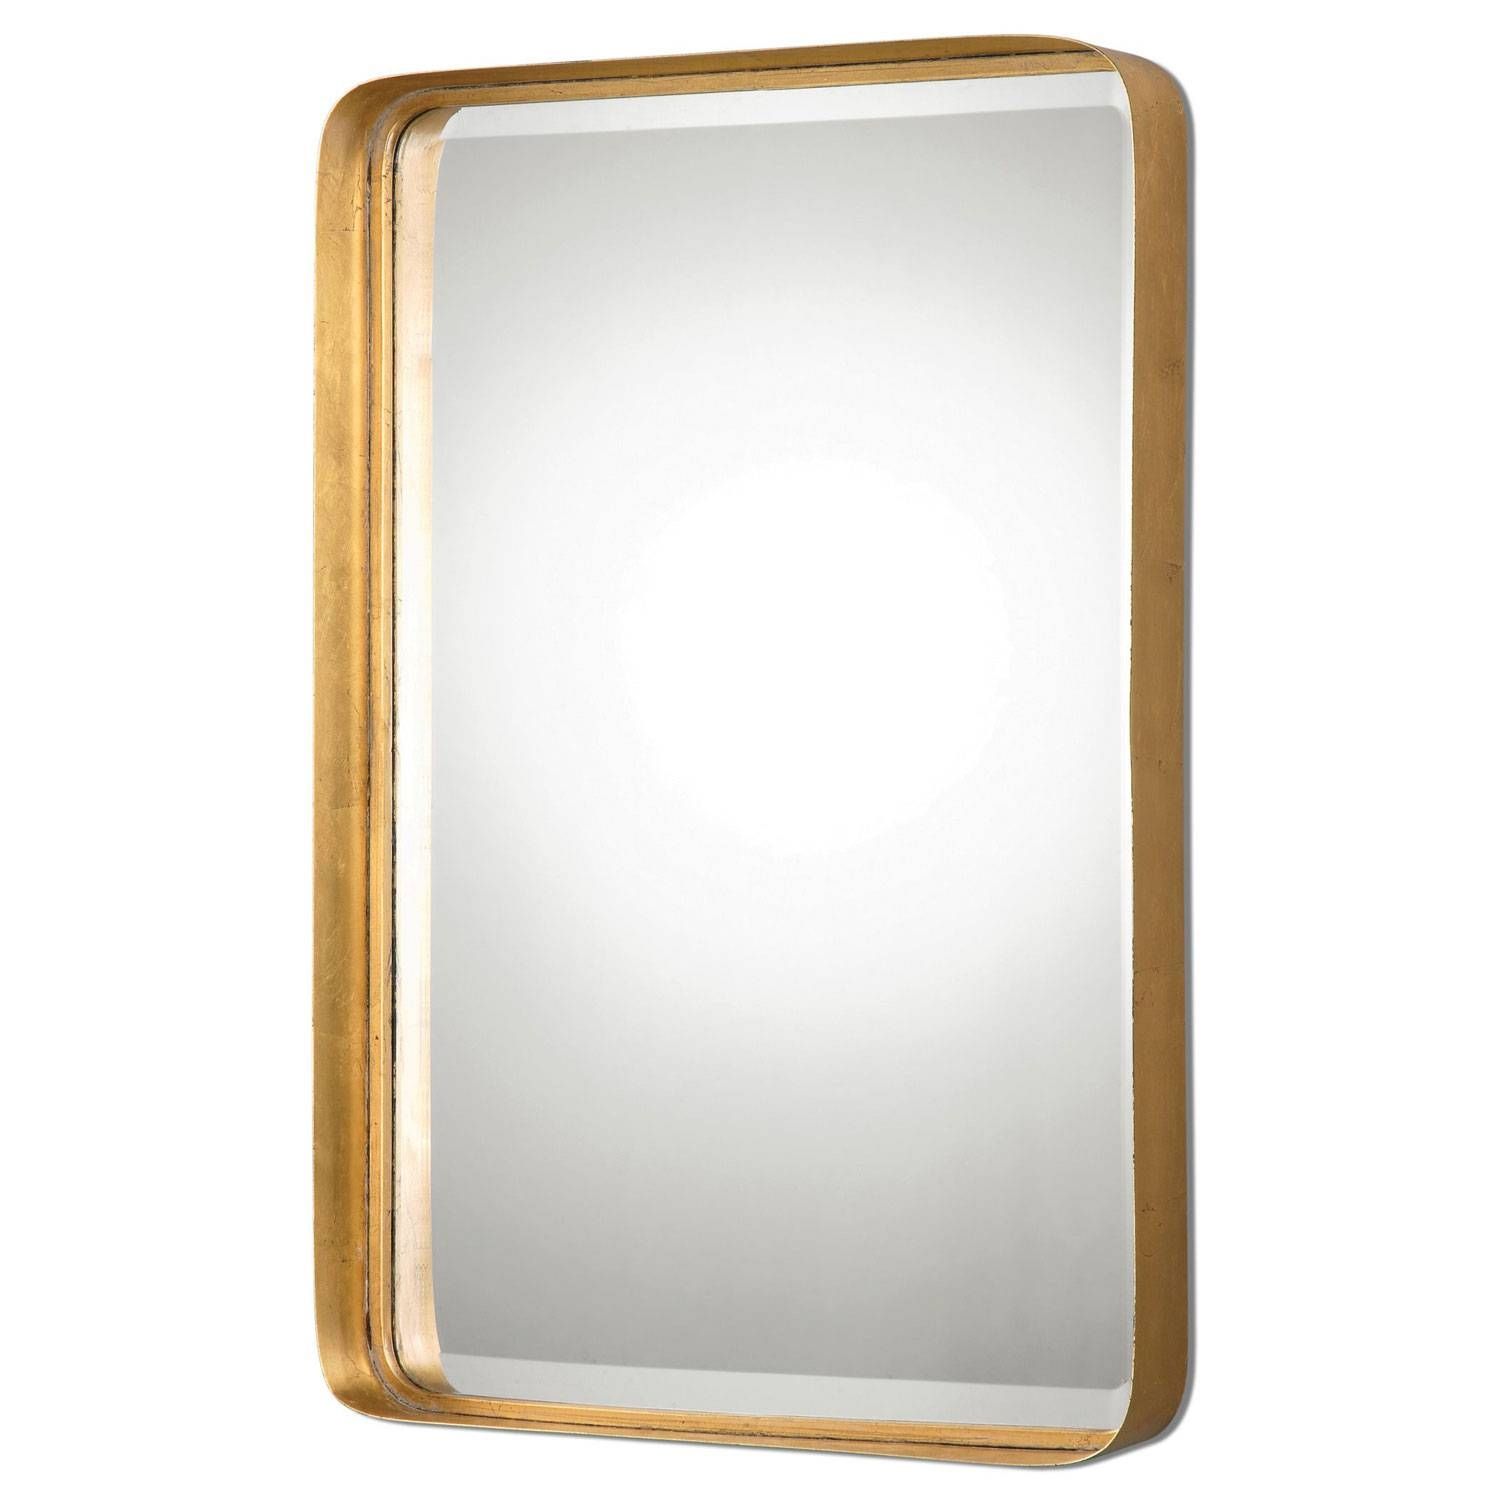 Crofton Antique Gold Mirror Uttermost Wall Mirror Mirrors Home Decor Within Large Antique Gold Mirrors (Photo 11 of 25)